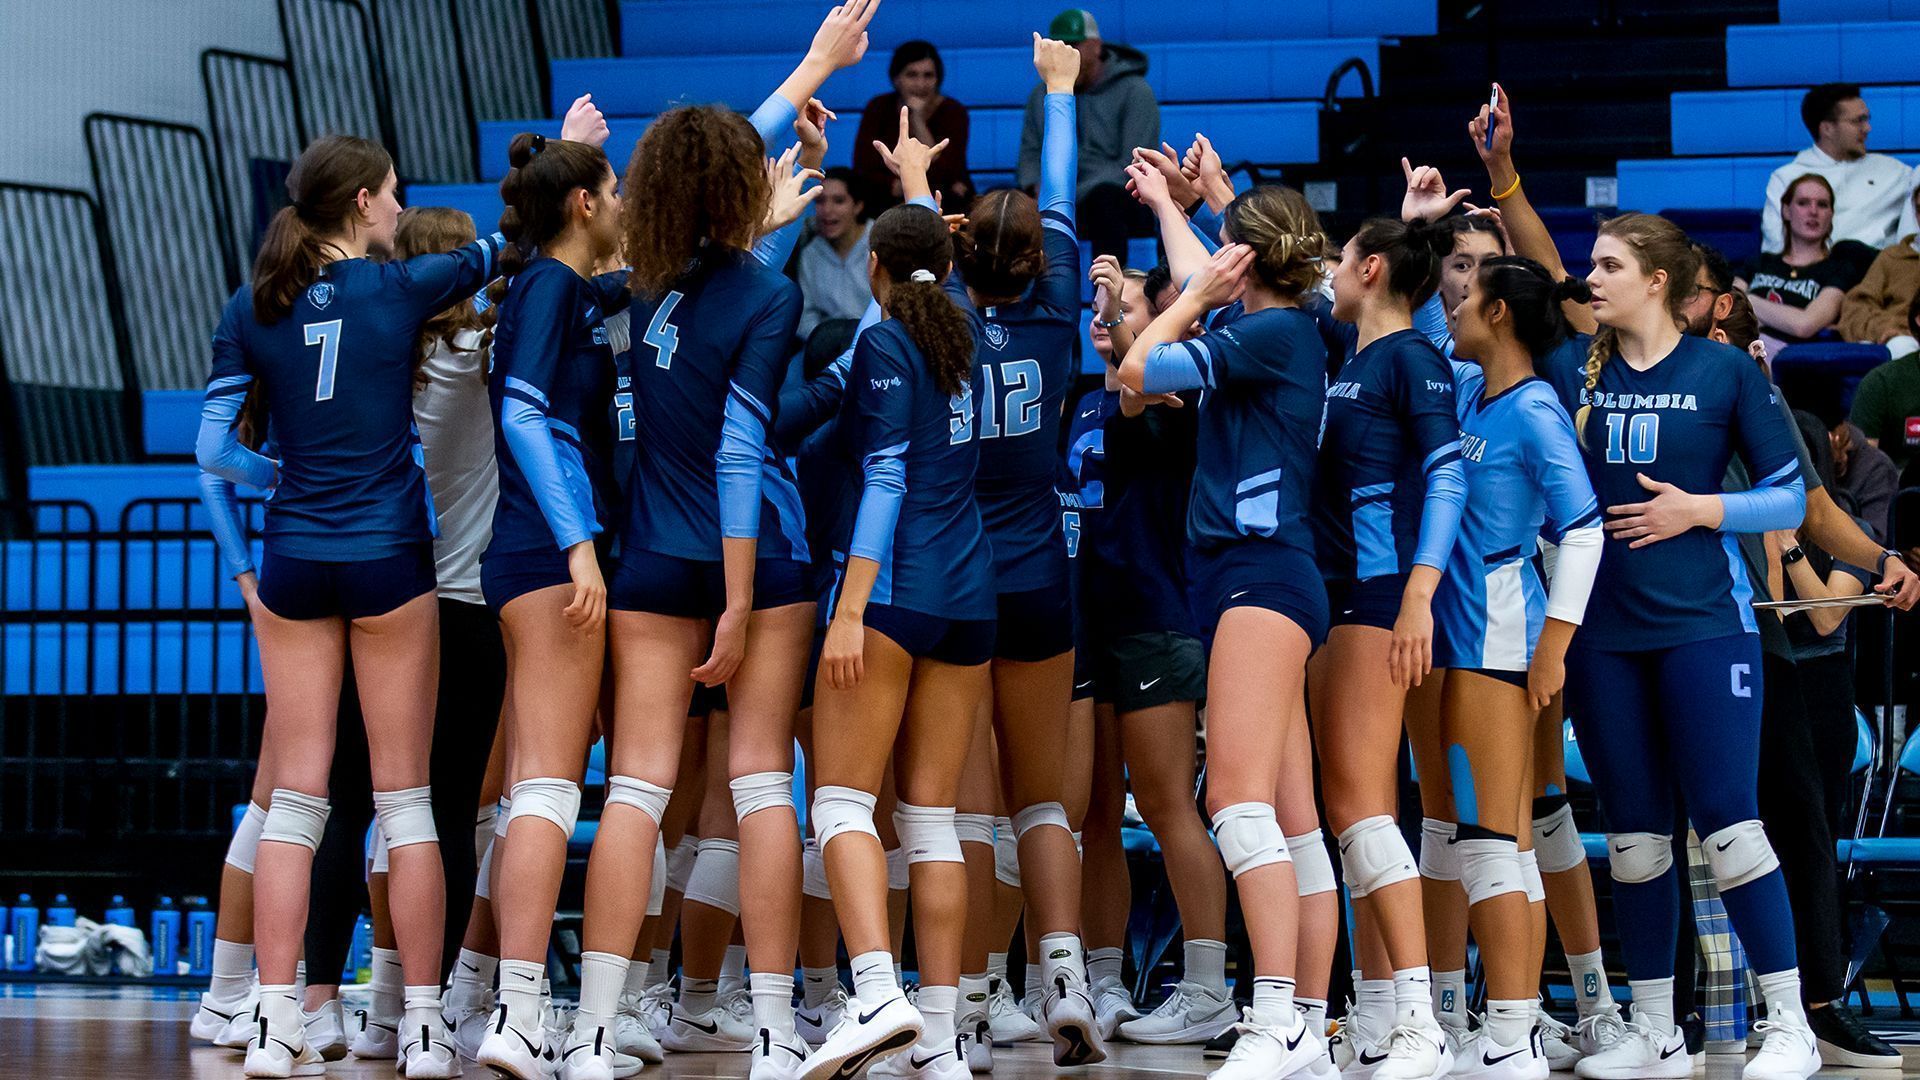 The volleyball team huddles together before a game. - Columbia University